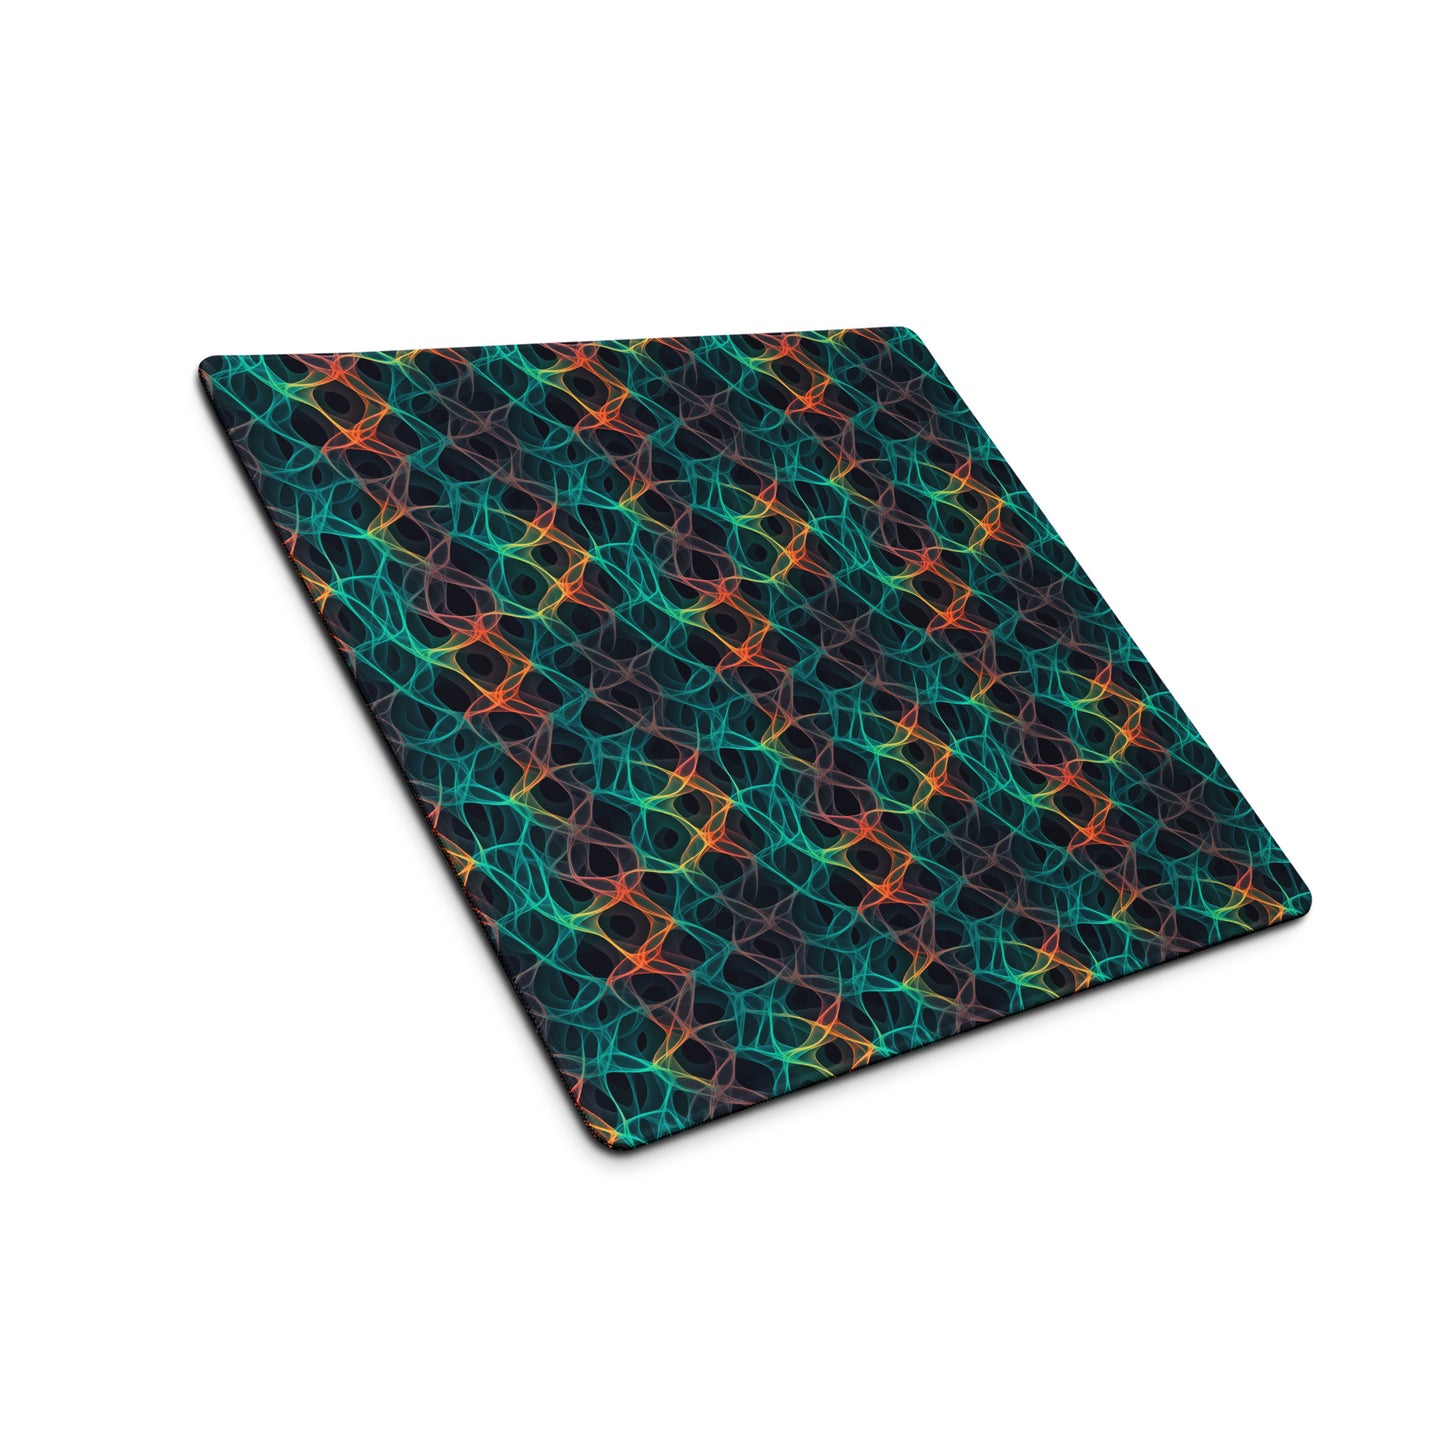 A 18" x 16" desk pad with an abstract pattern resembling a cell structure on it shown at an angle. Rainbow in color.